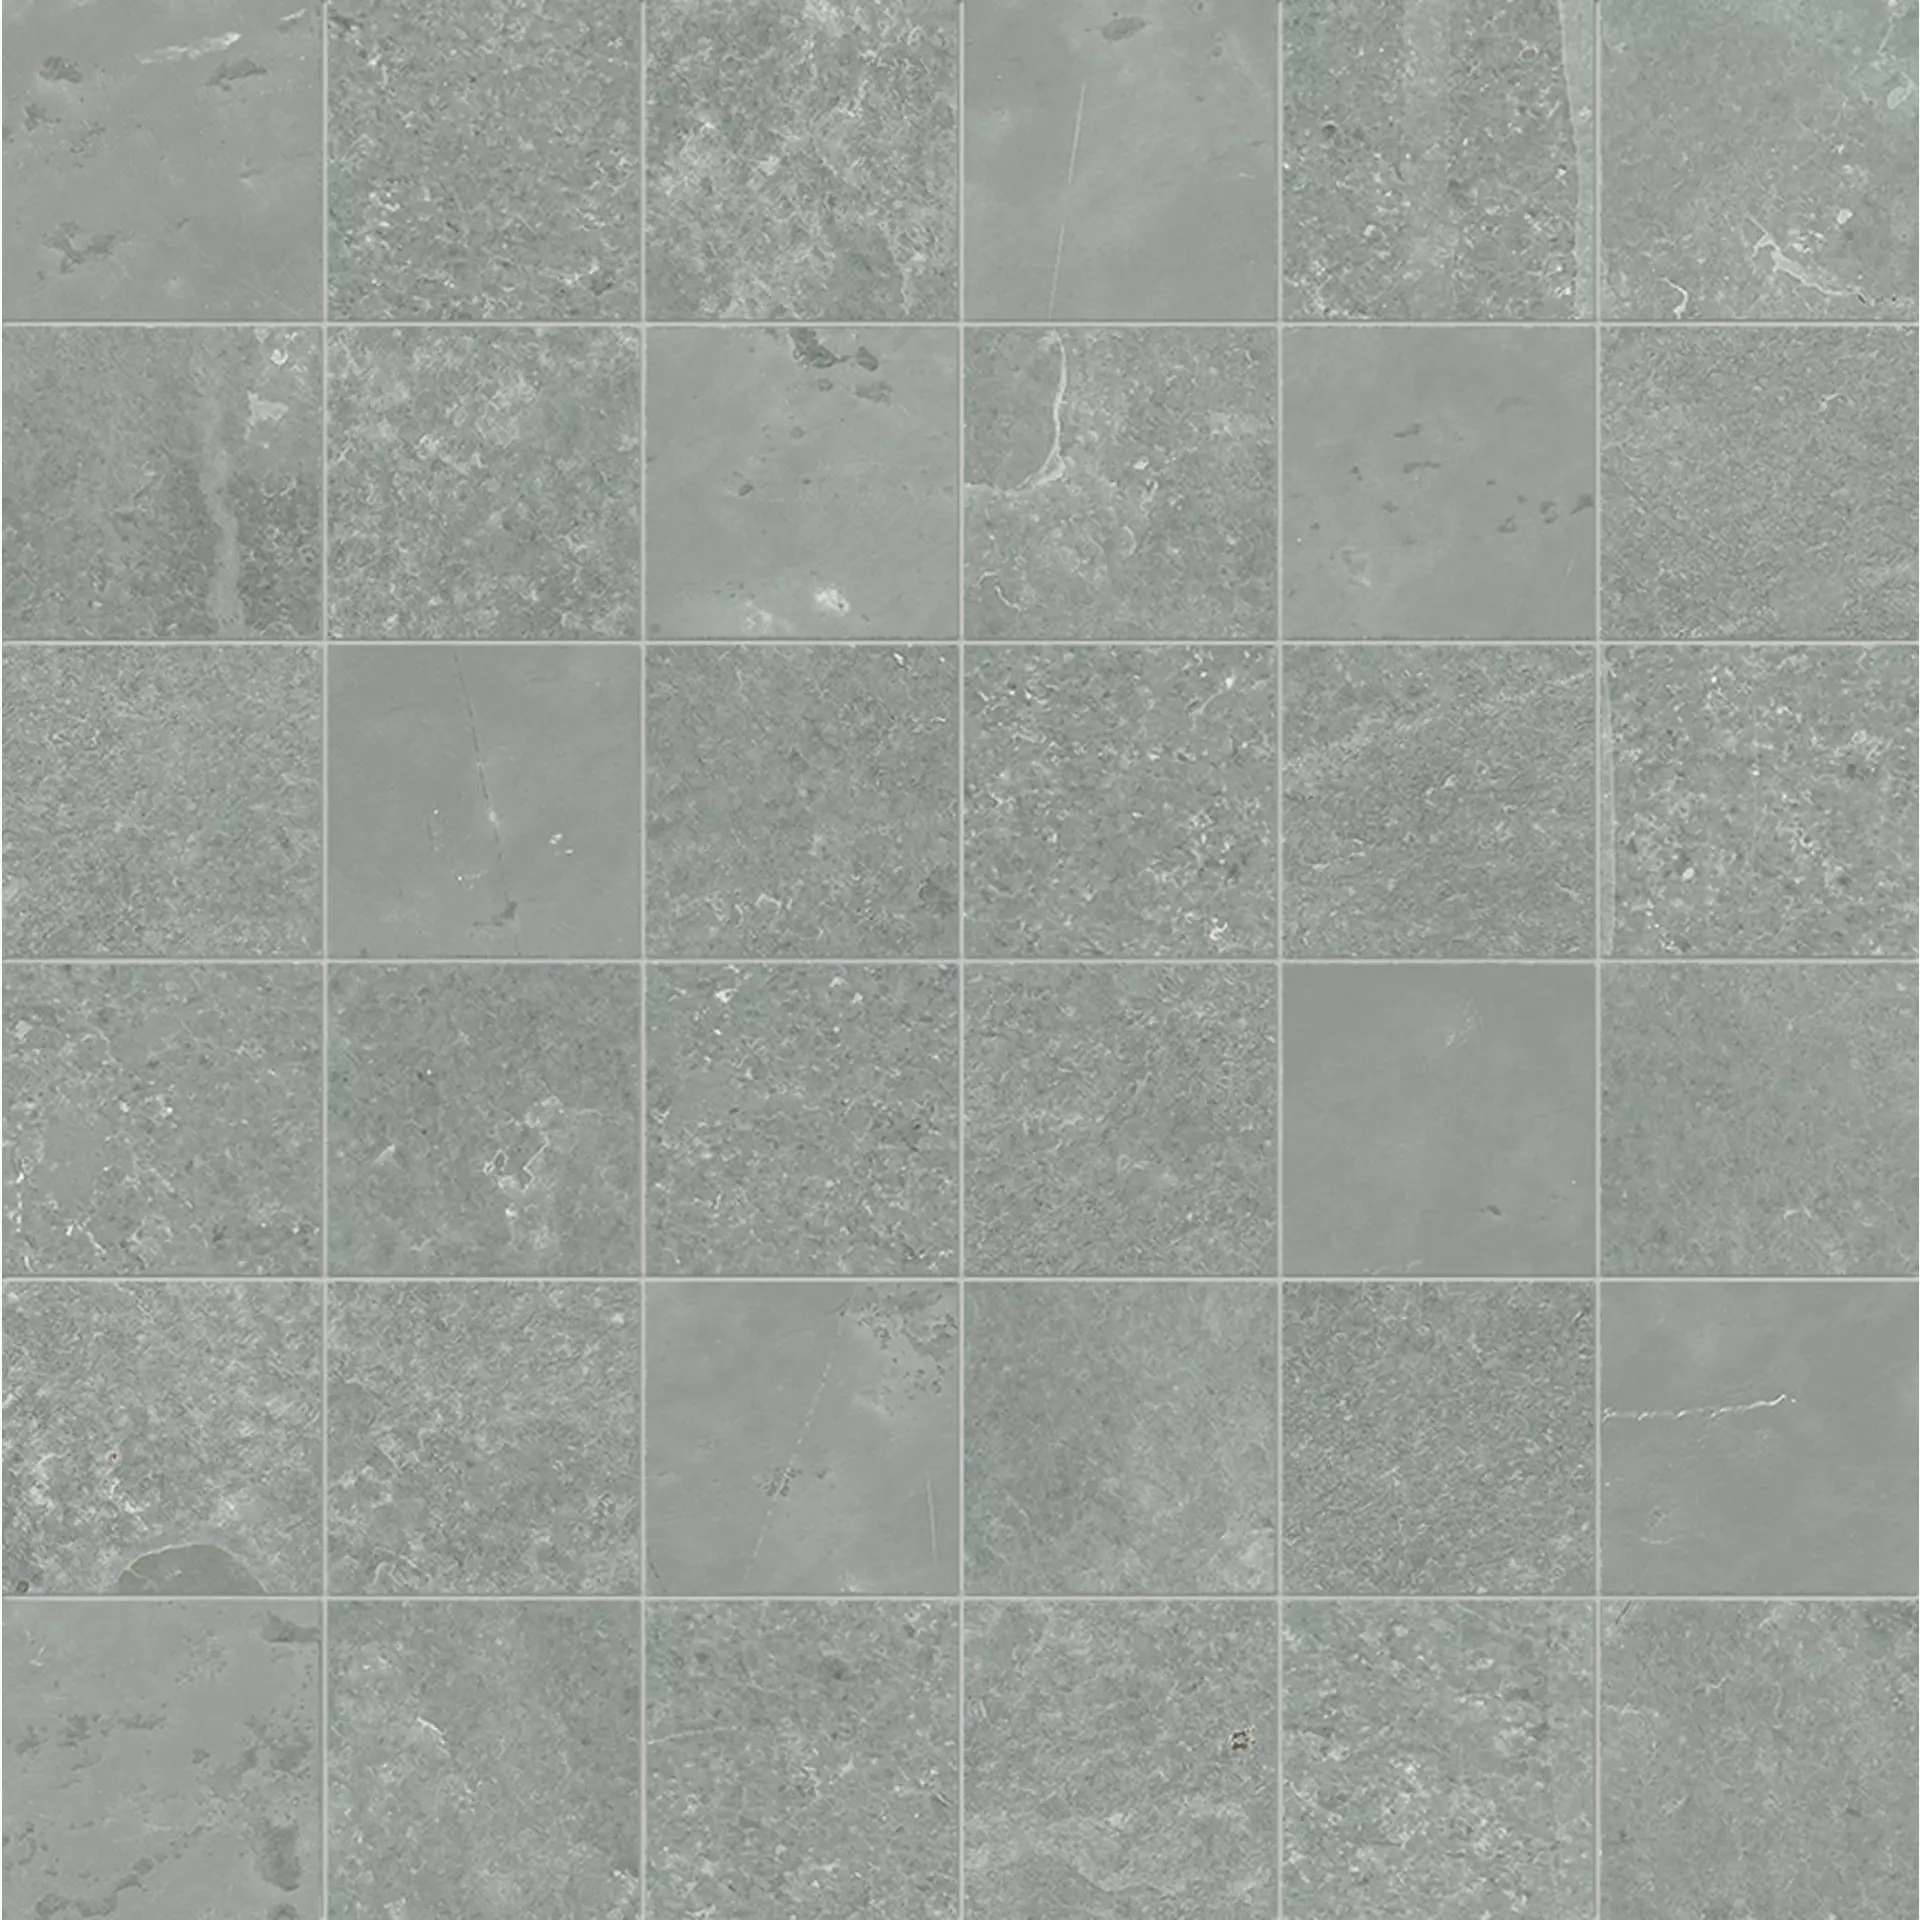 Provenza Groove Bright Grey Naturale Mosaic 5x5 E3FT 30x30cm rectified 9,5mm